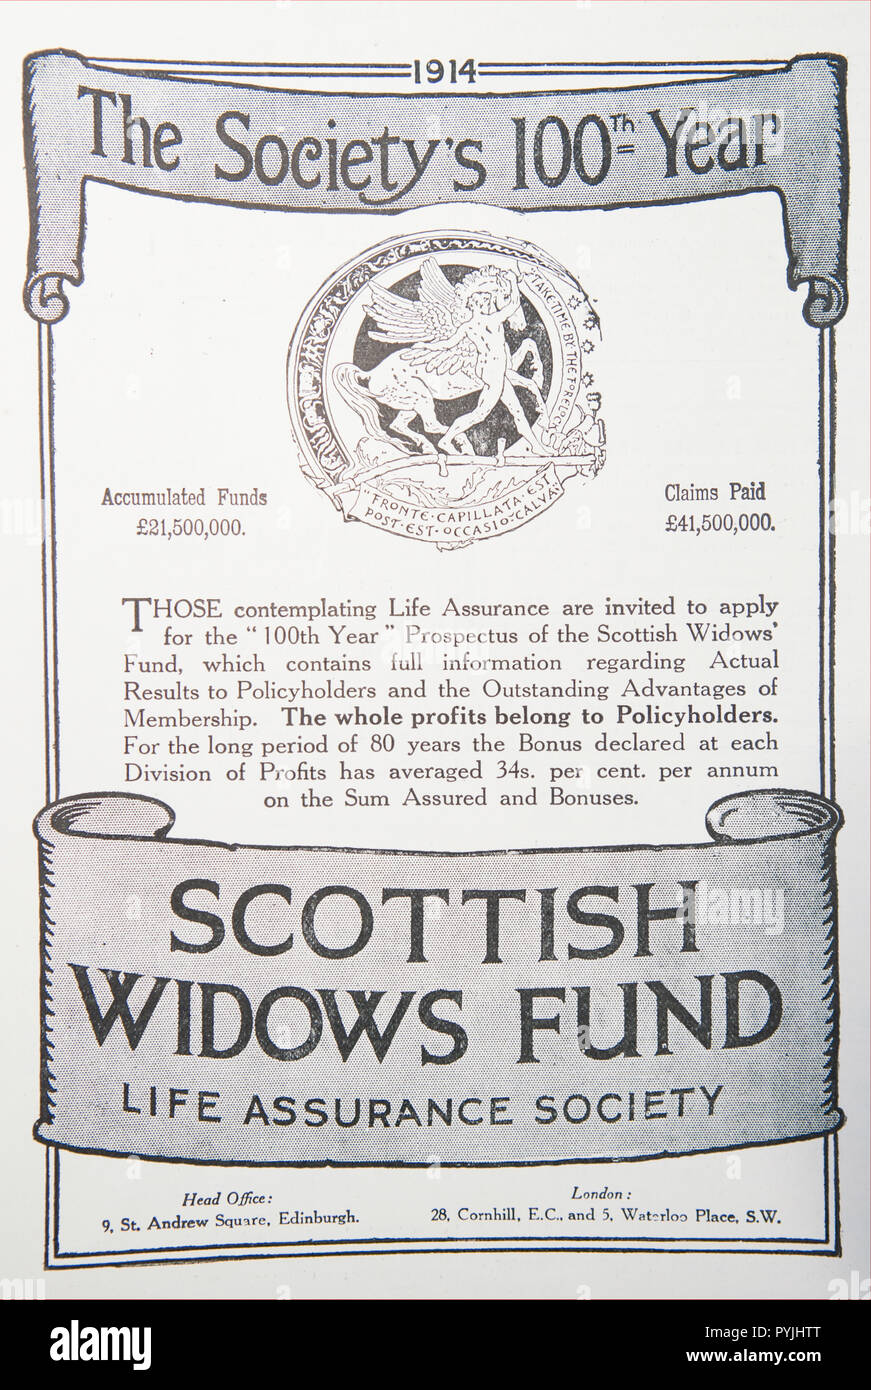 An old advert for Scottish Widows Fund. From a British magazine from the 1914-1918 period. England UK GB Stock Photo